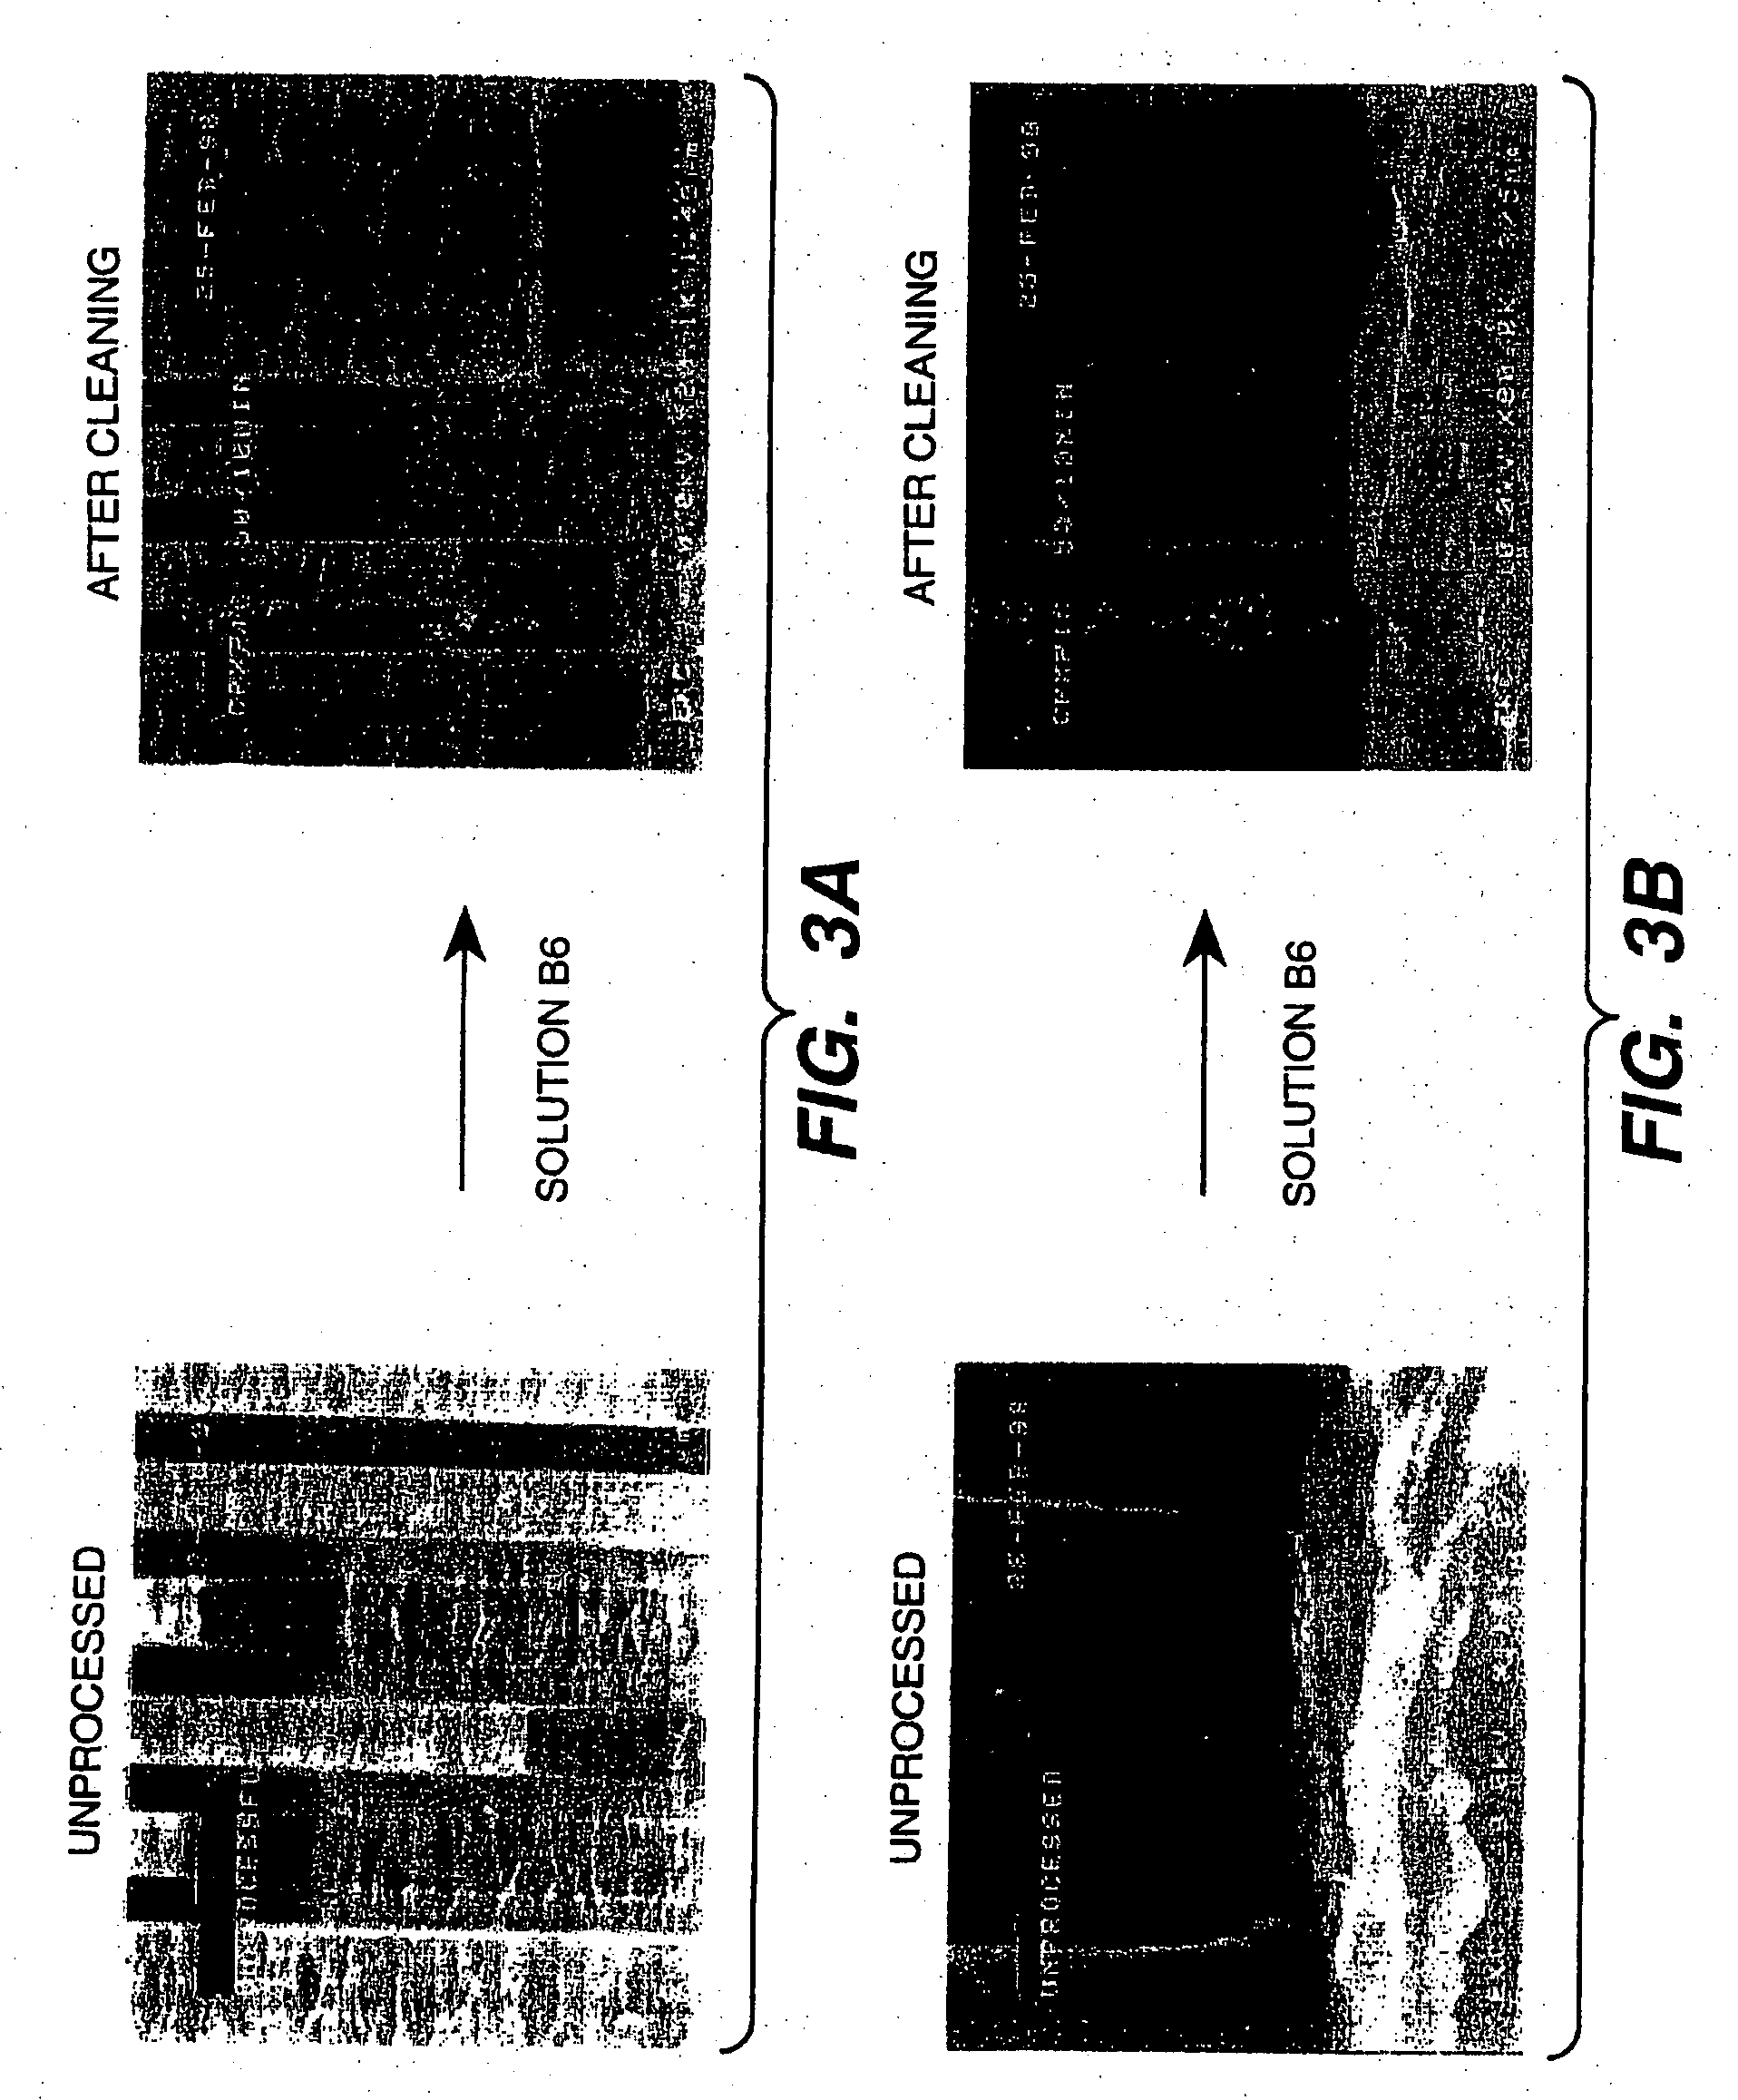 Remover compositions for dual damascene system